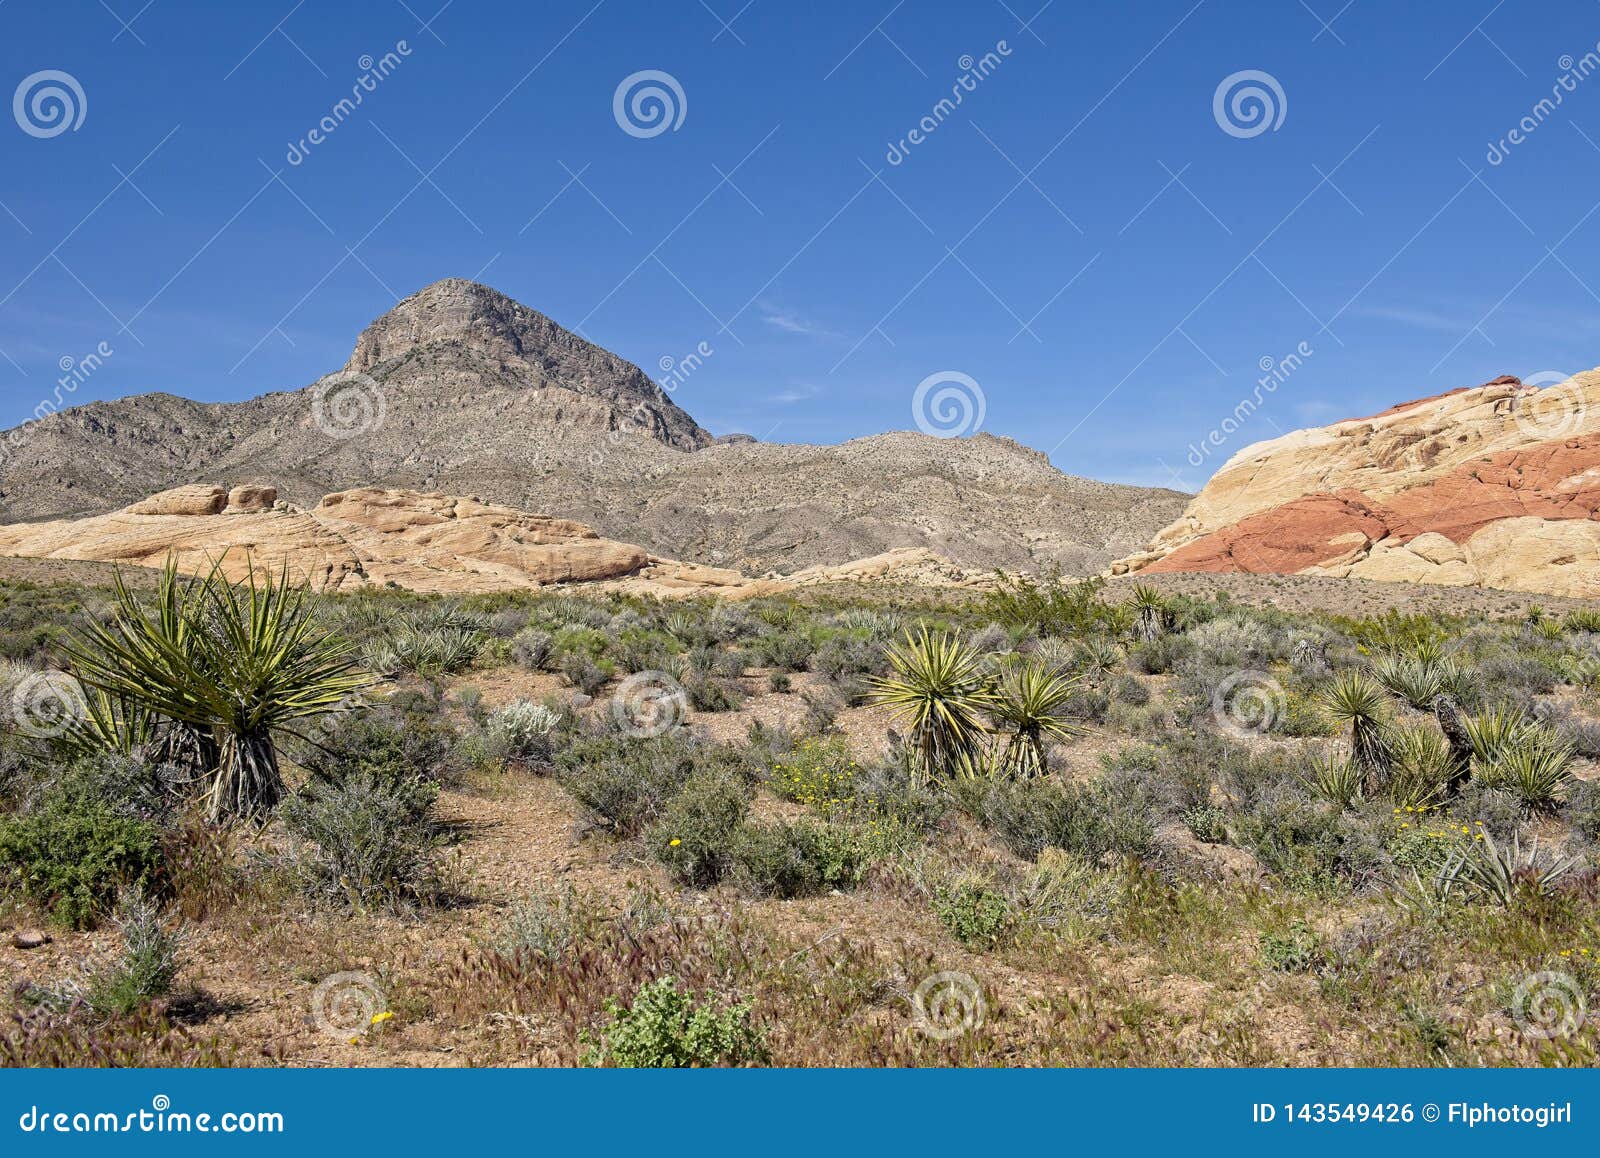 majestic mountains in the background at red rock canyon nature conservancy